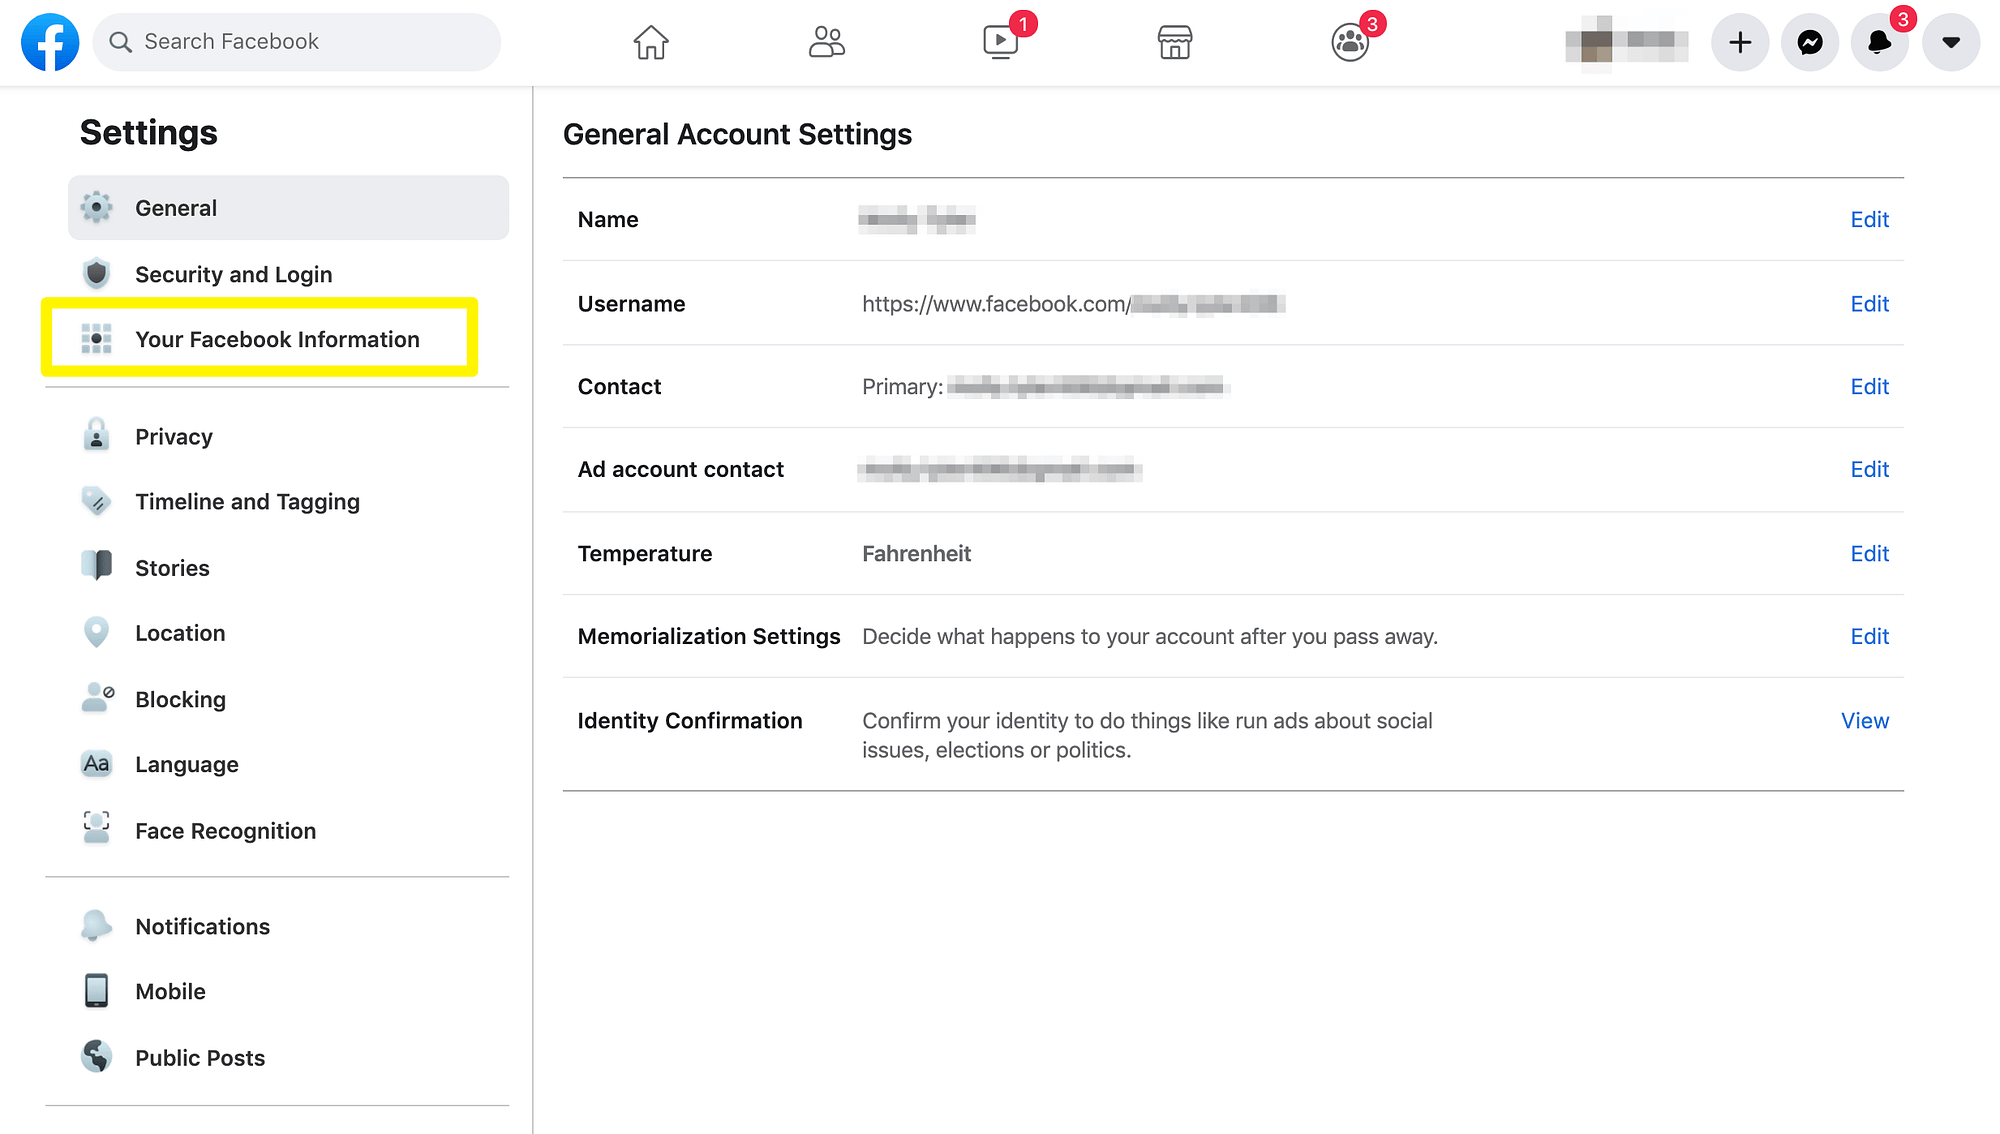 Accessing Facebook's information settings